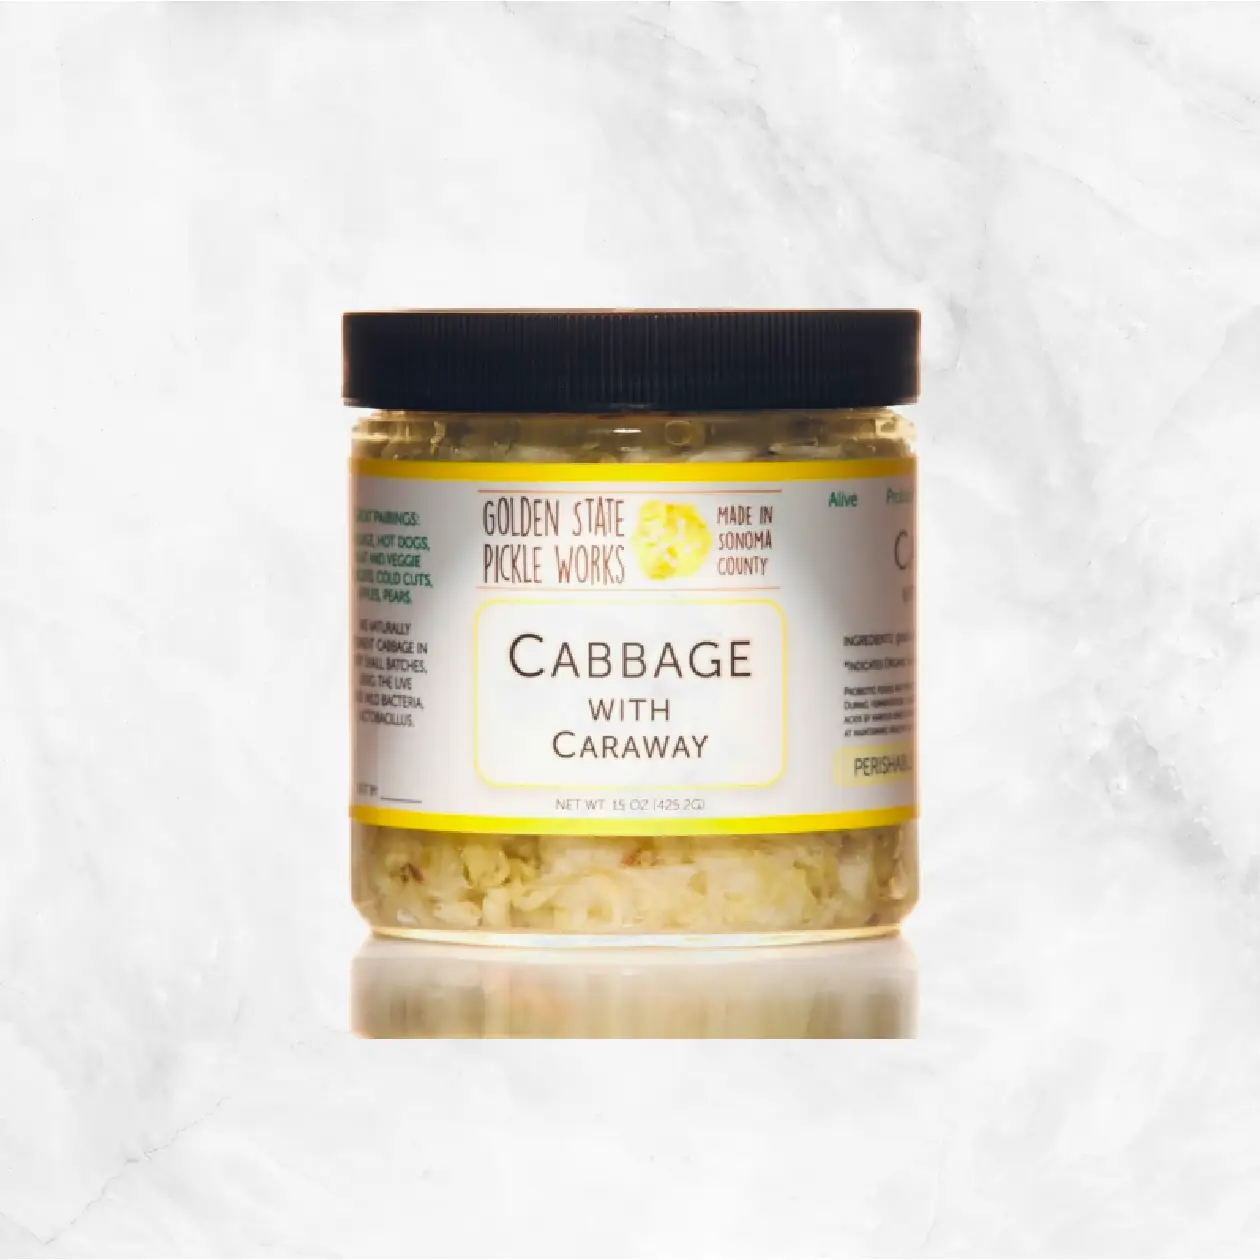 Cabbage with Caraway